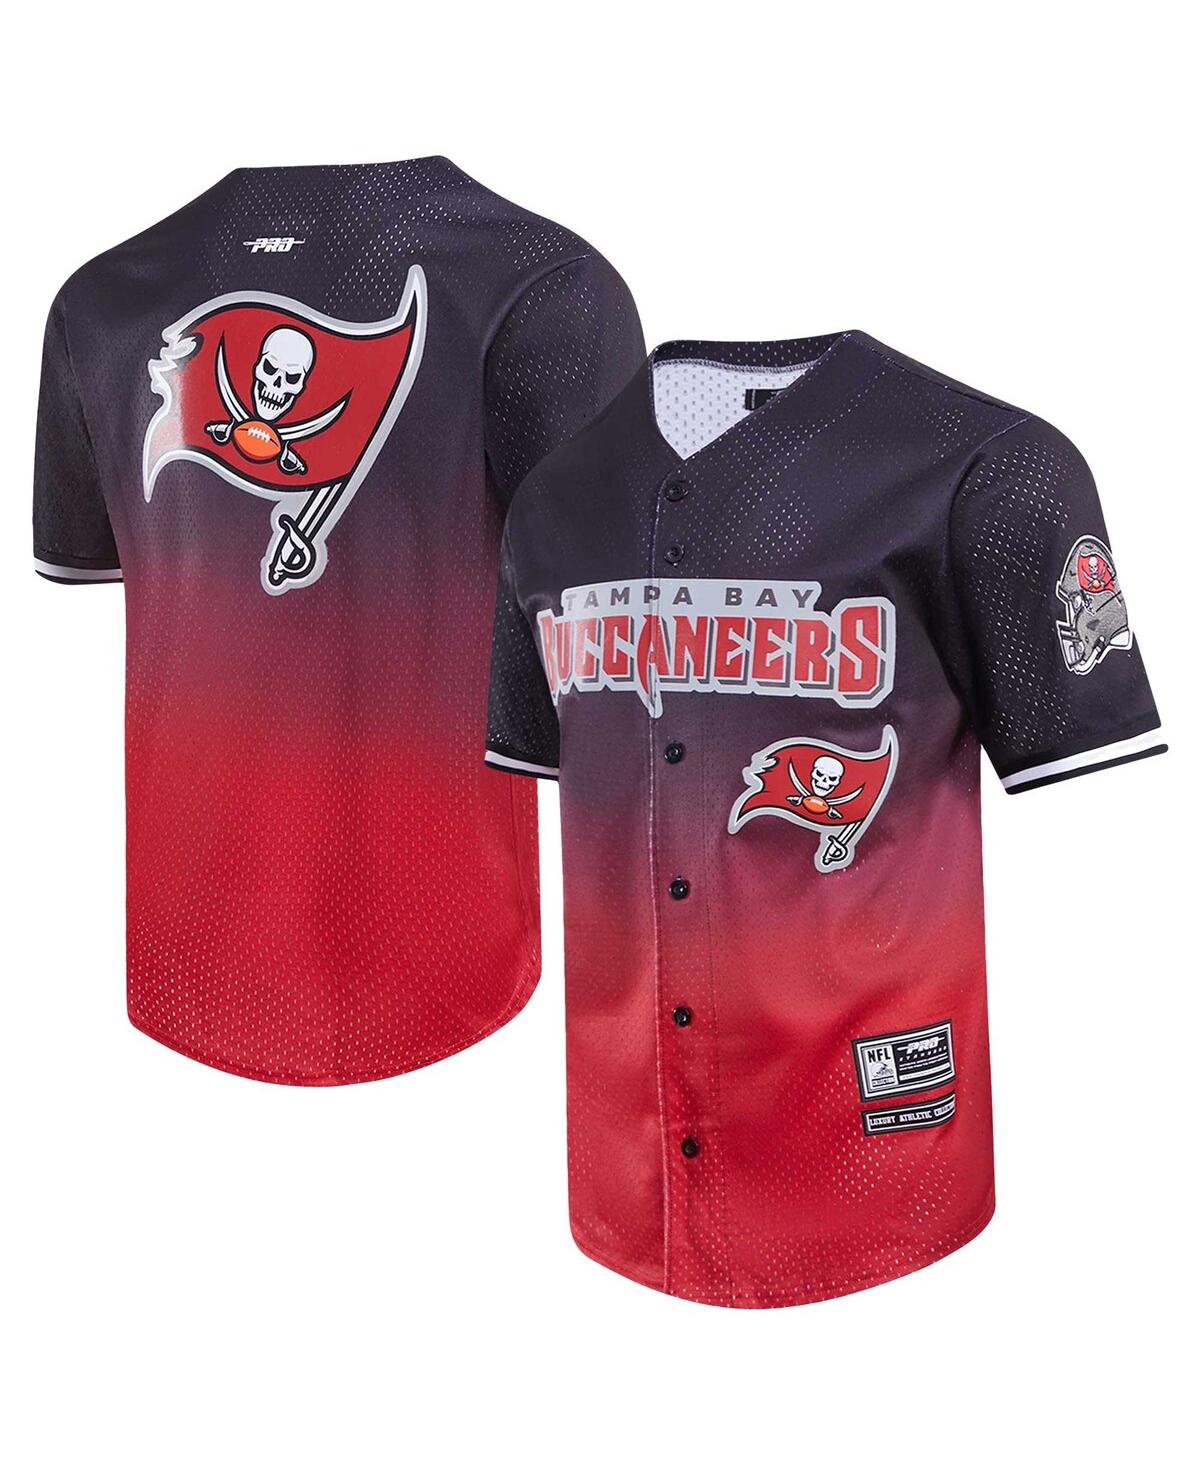 PRO STANDARD MEN'S PRO STANDARD BLACK, RED TAMPA BAY BUCCANEERS OMBRE MESH BUTTON-UP SHIRT